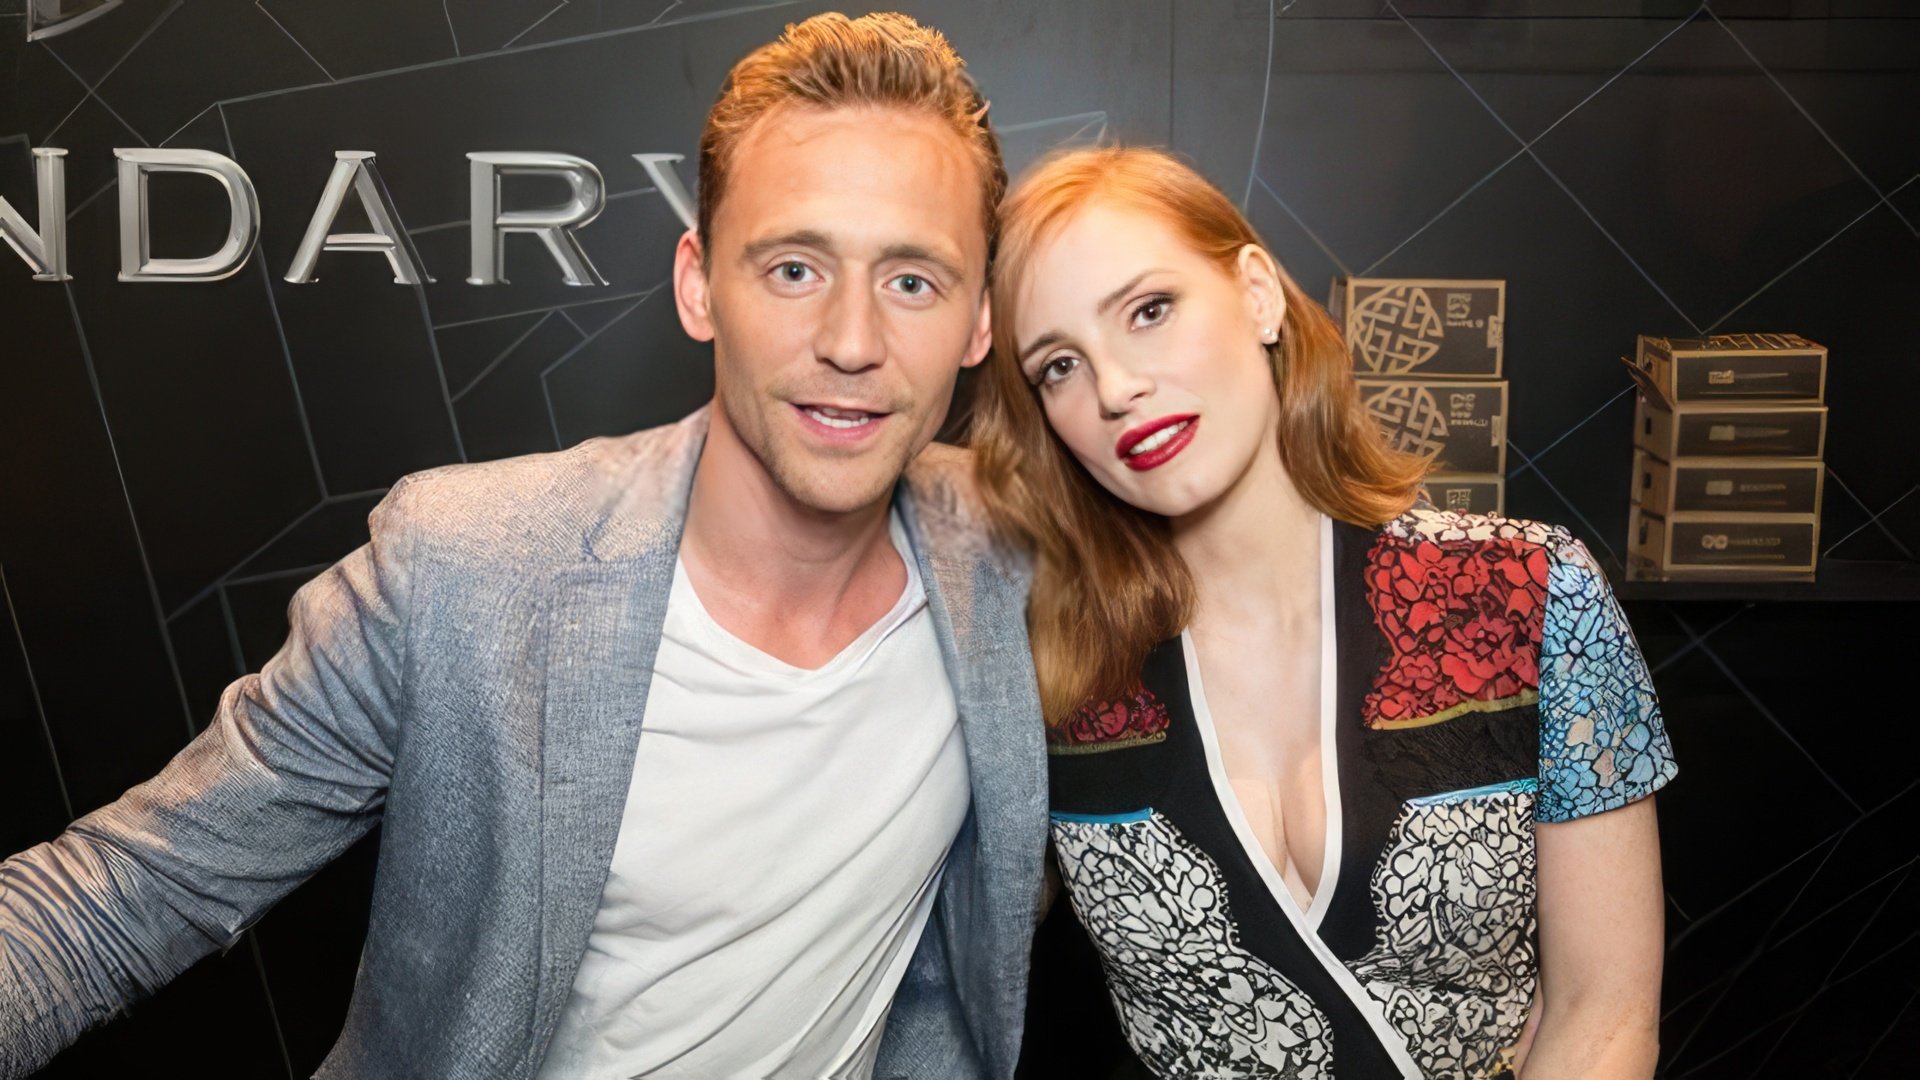 Jessica Chastain and Tom Hiddleston